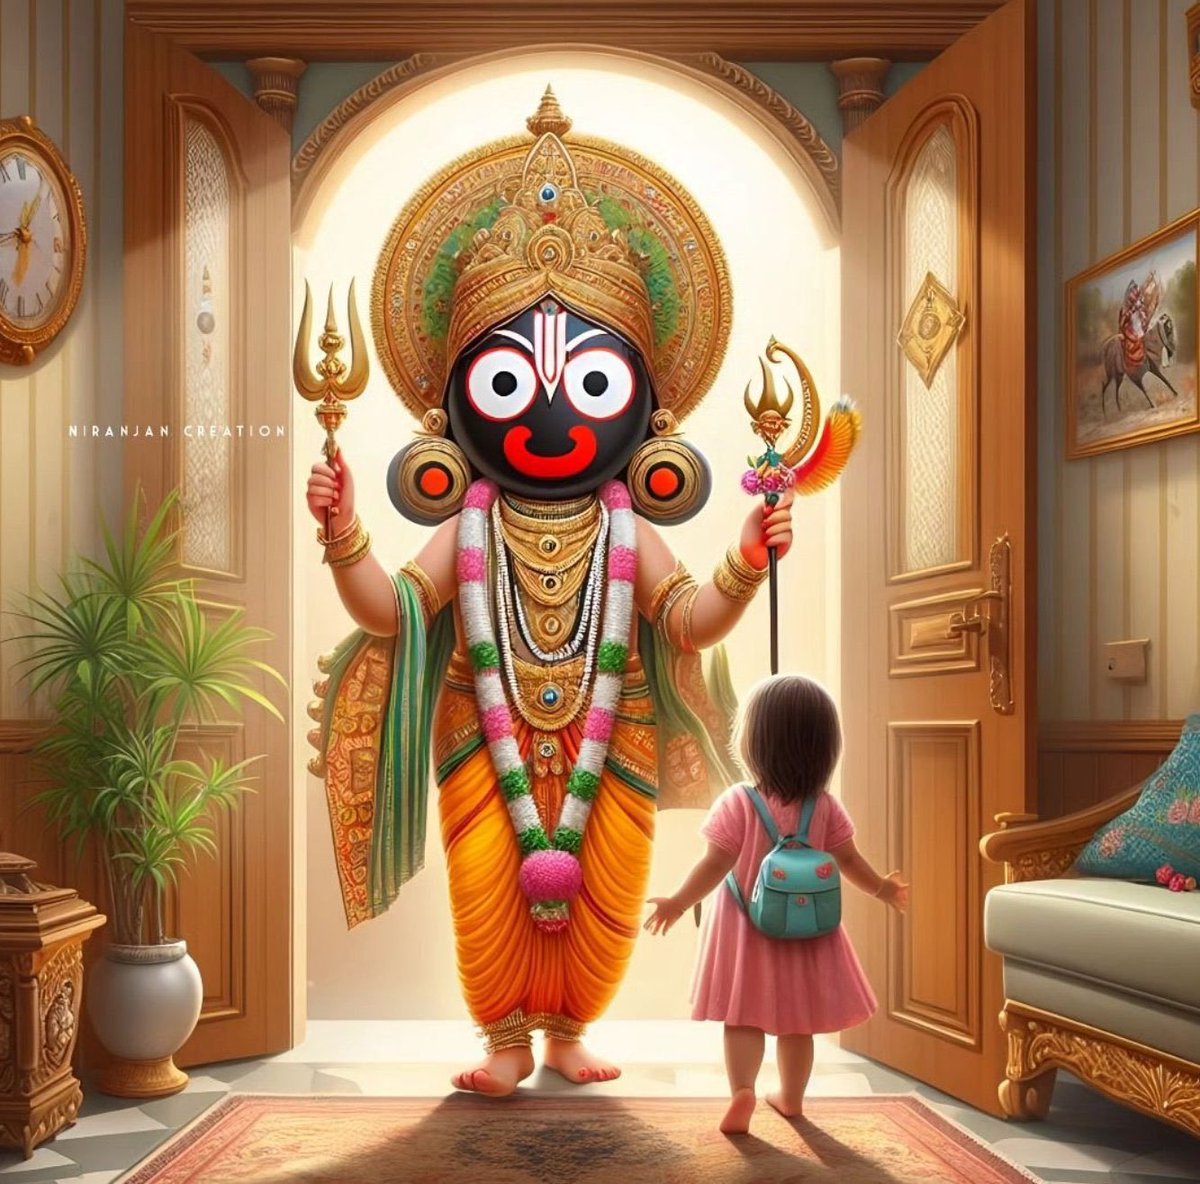 Friends can you reply with Jai Jagannath?